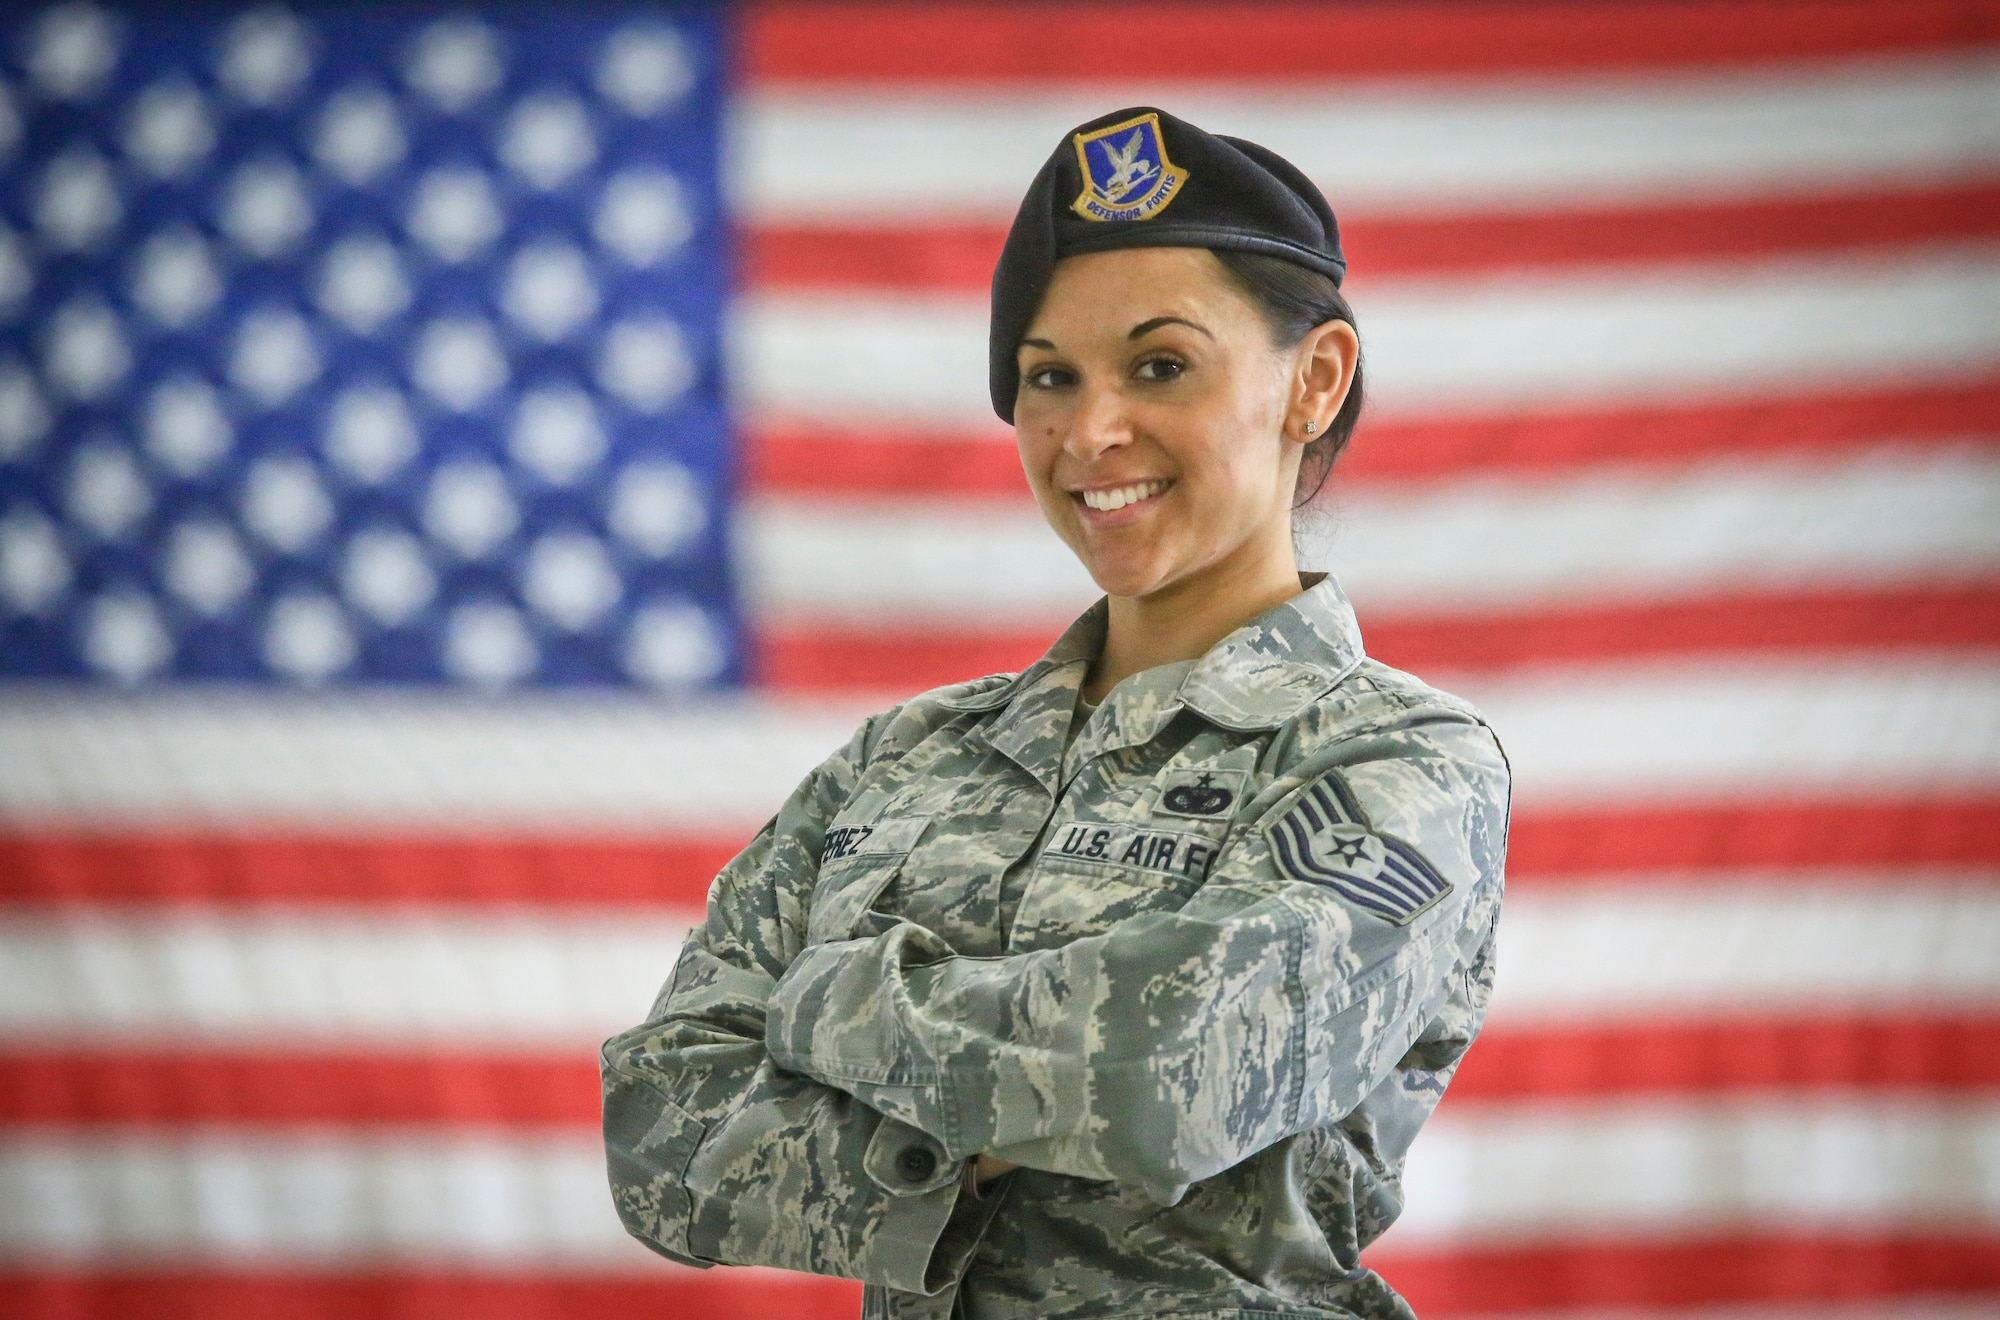 New Jersey Air National Guard Tech. Sgt. Heather Perez stands for a portrait in the 108th Security Forces facility on Joint Base McGuire-Dix-Lakehurst, N.J., March 1, 2018. Perez is a veteran of Operation Iraqi Freedom, and a combatives instructor. (U.S. Air National Guard photo by Master Sgt. Matt Hecht)